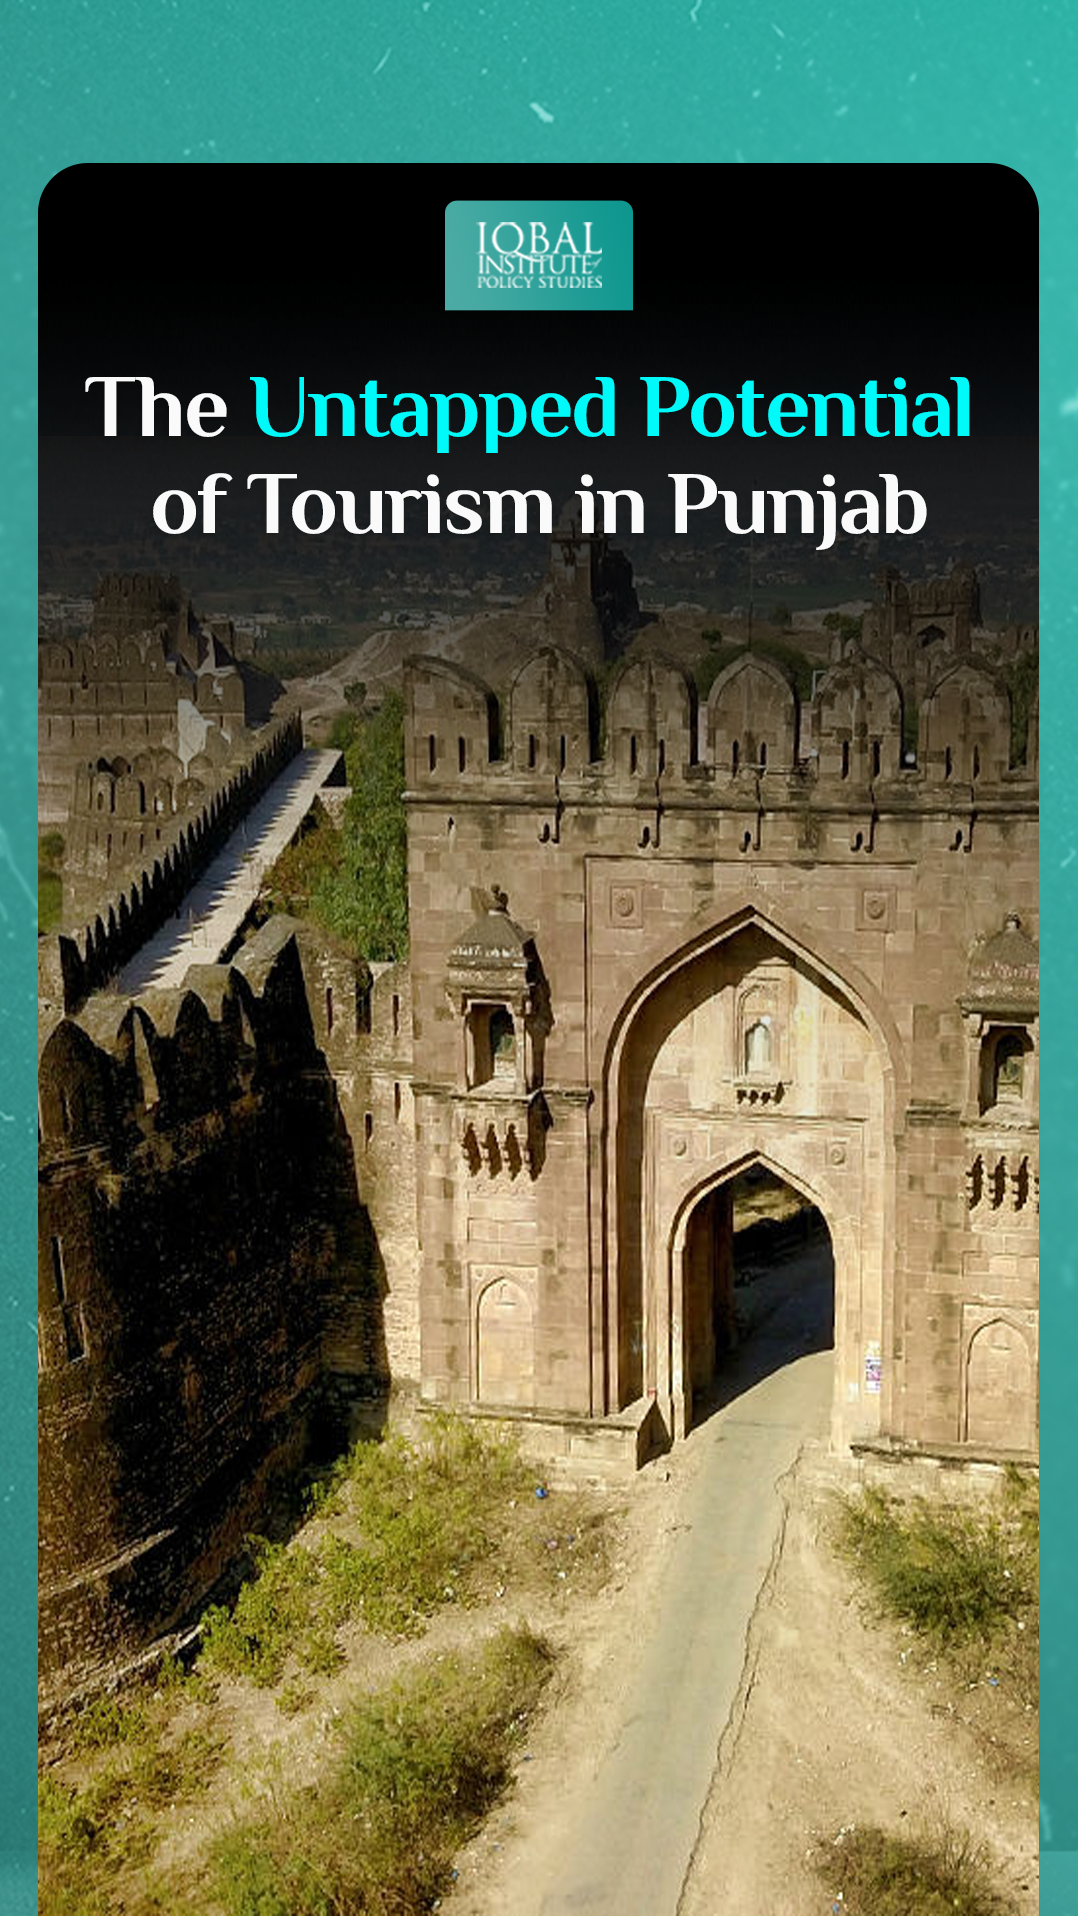 The Untapped Tourism Potential in Punjab